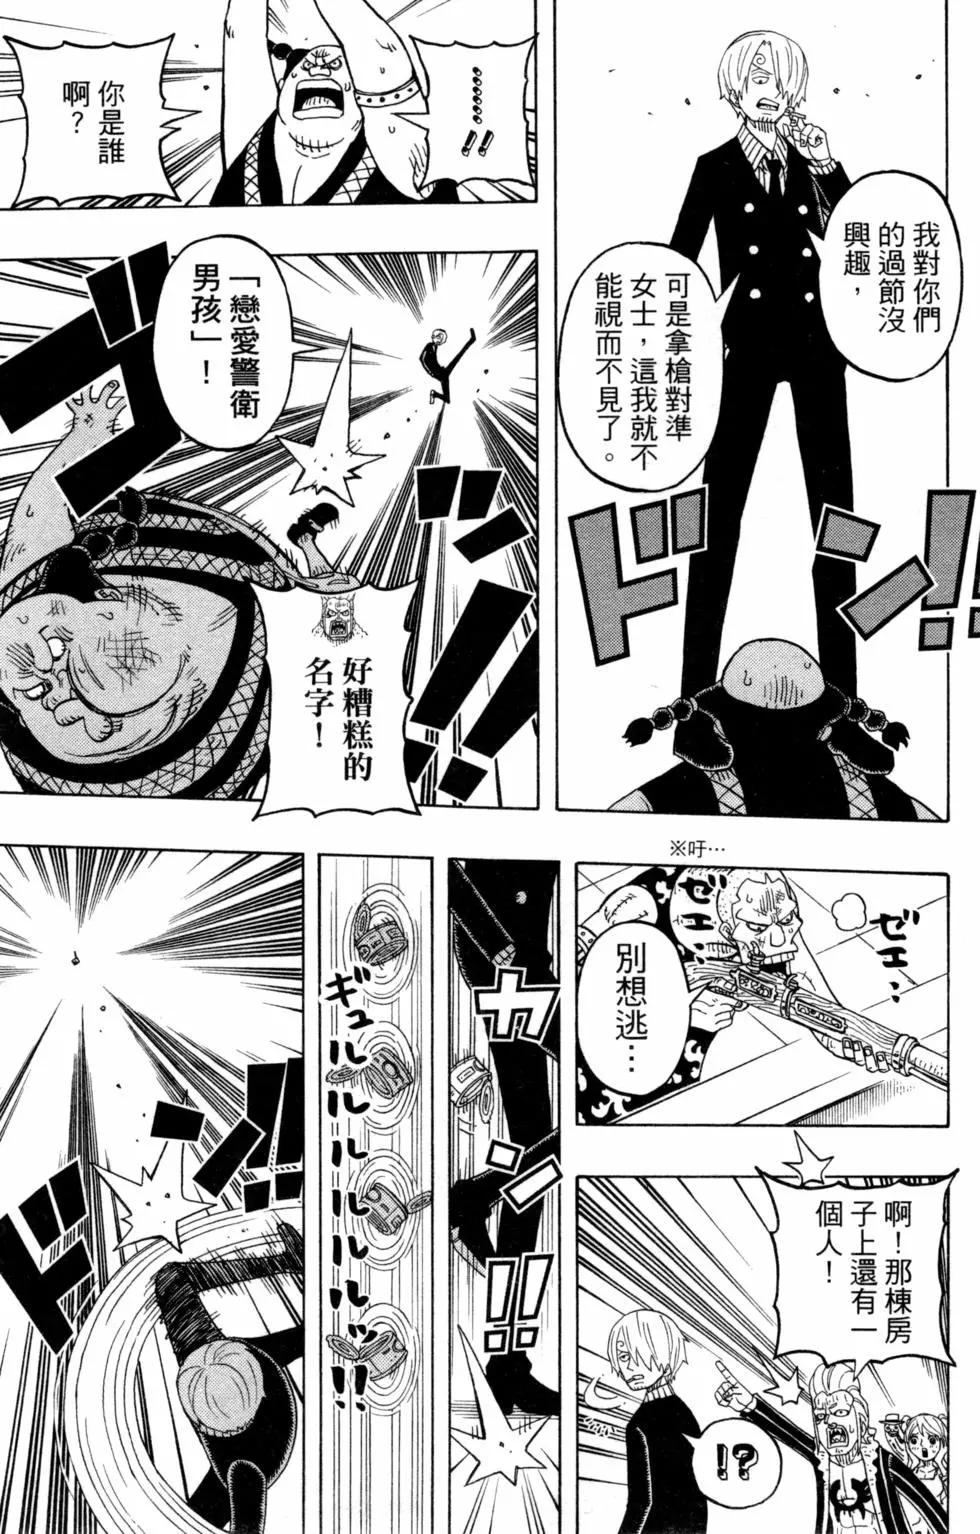 One piece party - 第06卷(2/4) - 8